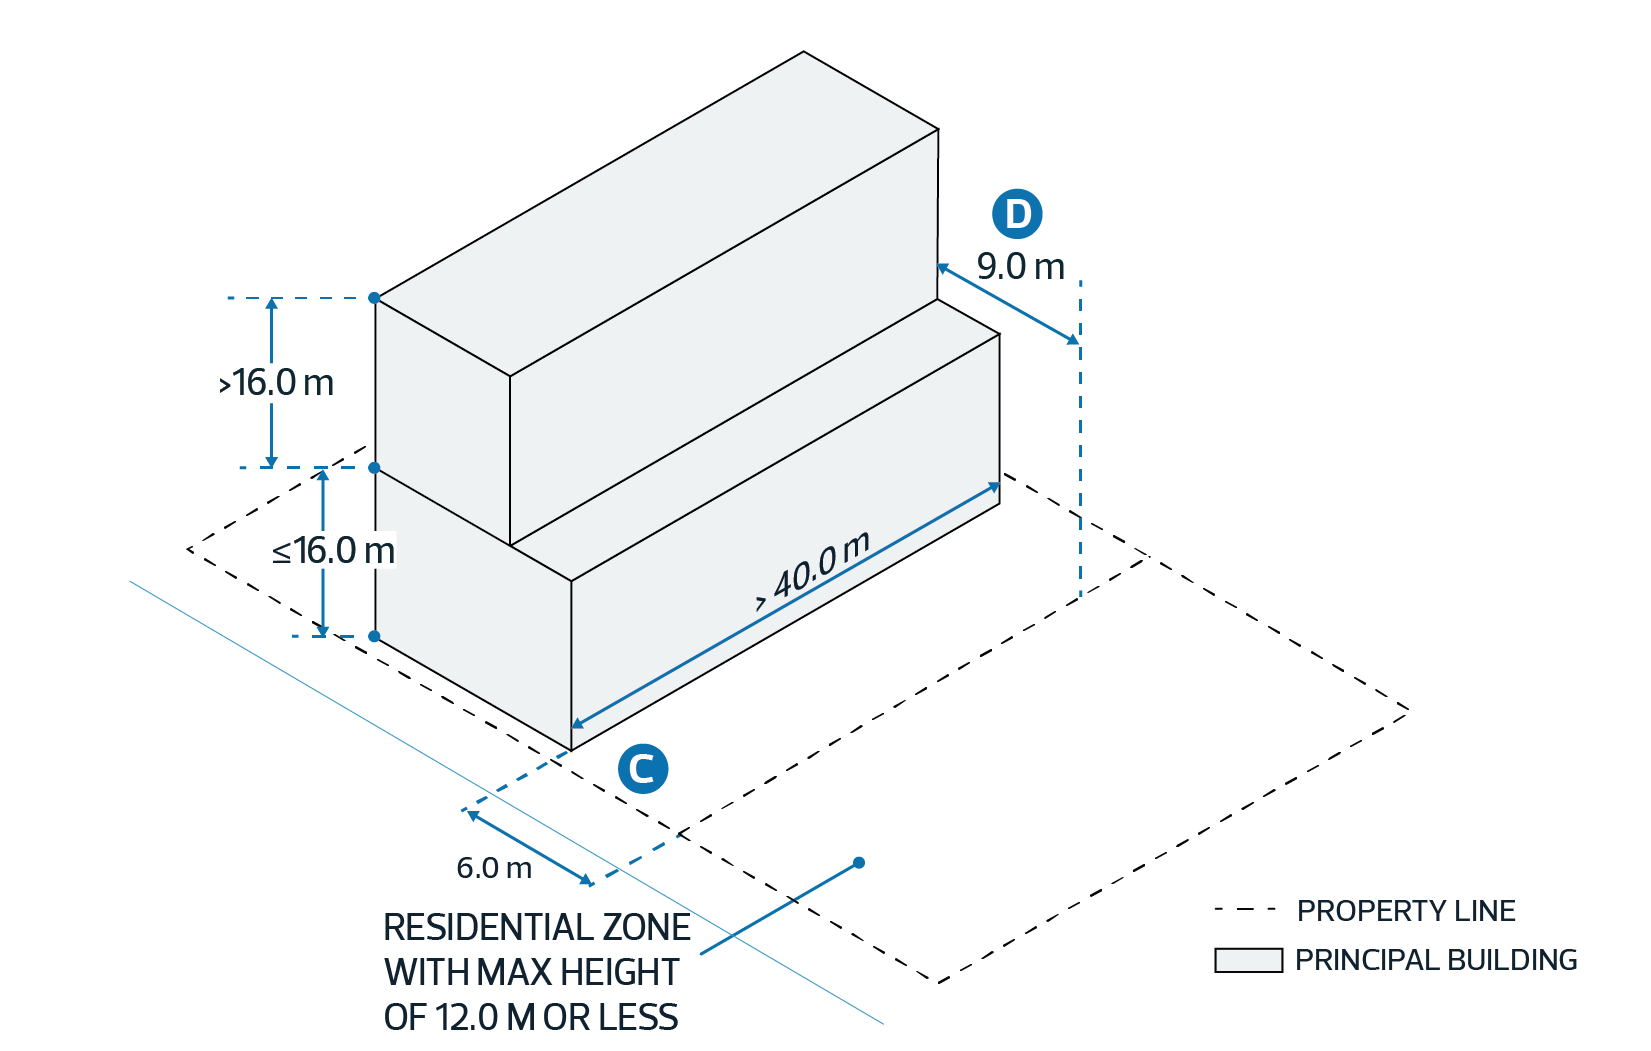 Diagram showing minimum transition Setbacks for building walls greater than 40.0 m in length